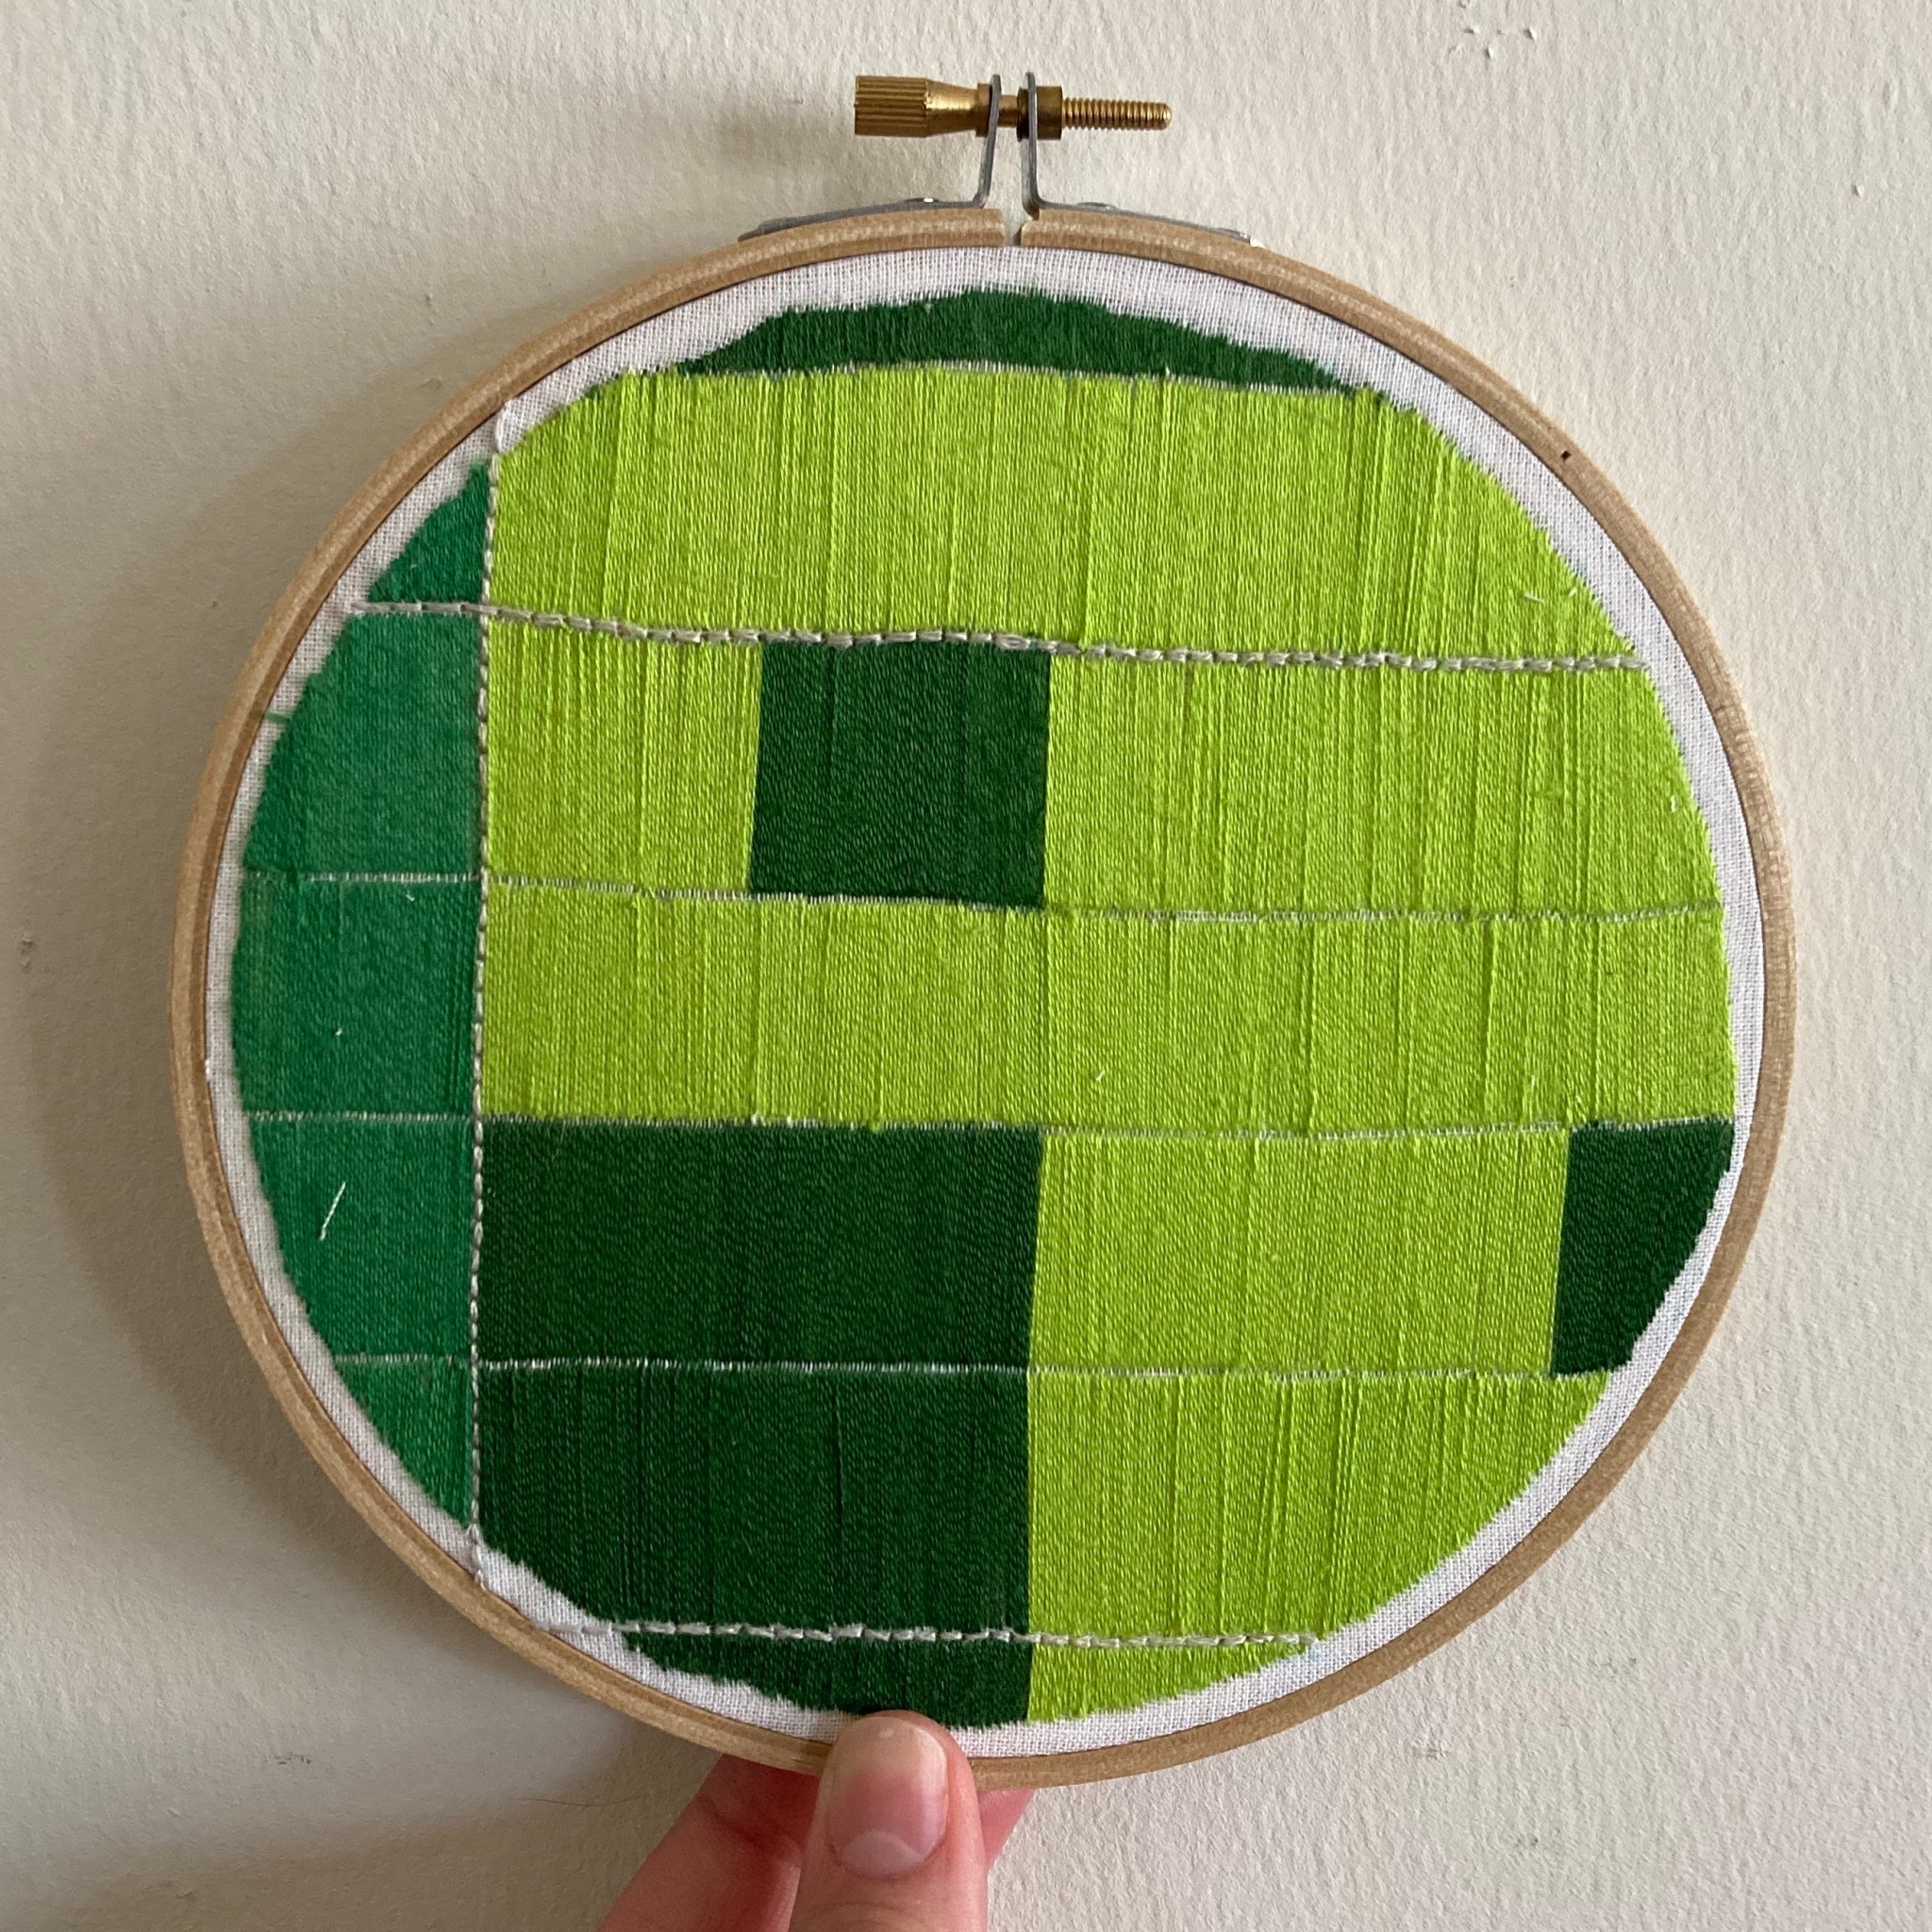 An embroidery hoop held in front of a white wall by two fingers. The embroidery is squares made of satin stitched straight lines, with three different shades of green, one color in each square.